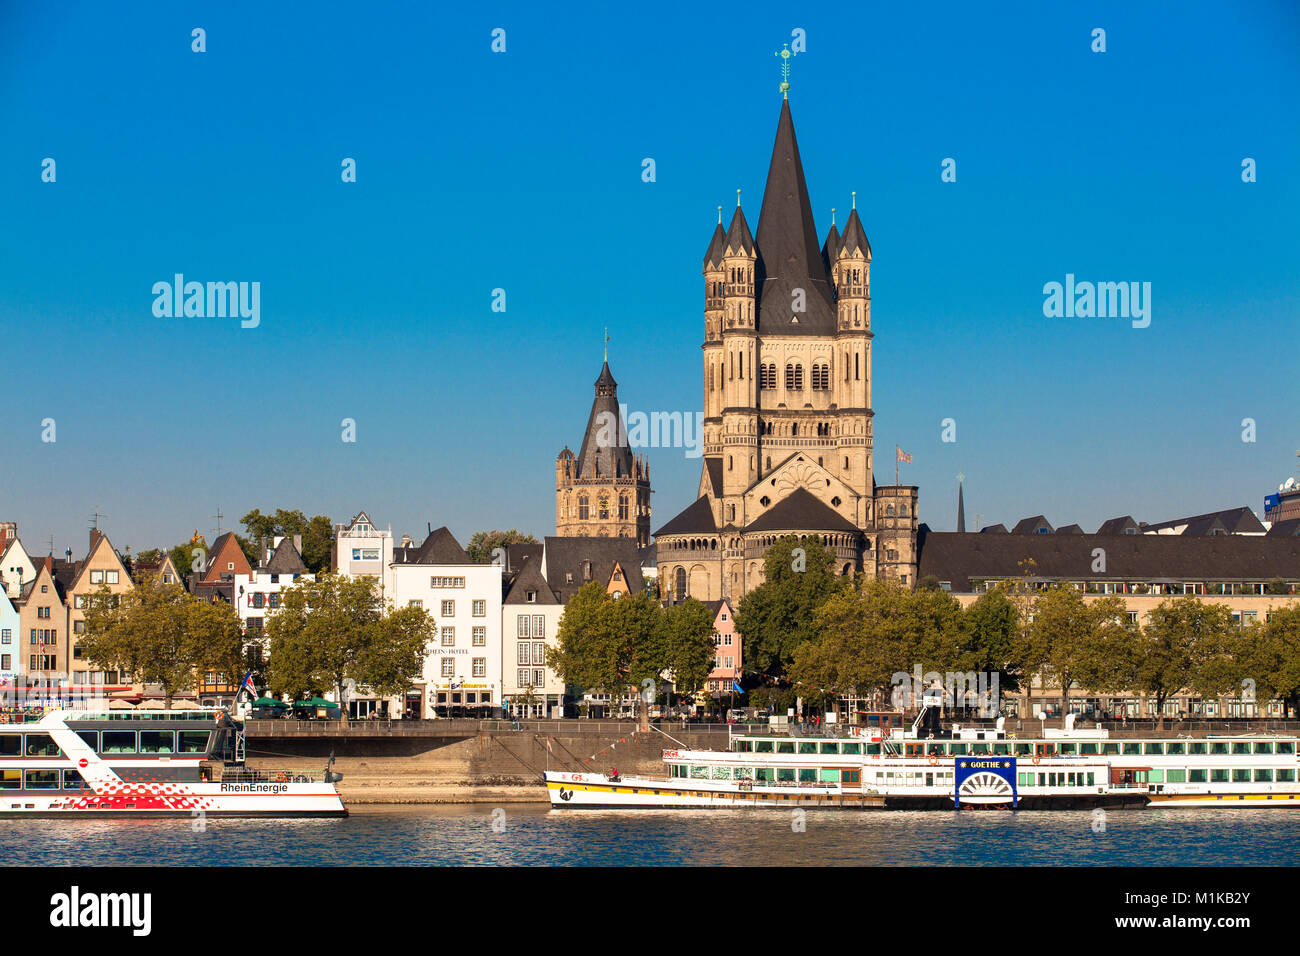 Germany, Cologne, view across the river Rhine to the Frankenwerft in the old part of the town with the steeple of the historic town hall and the roman Stock Photo